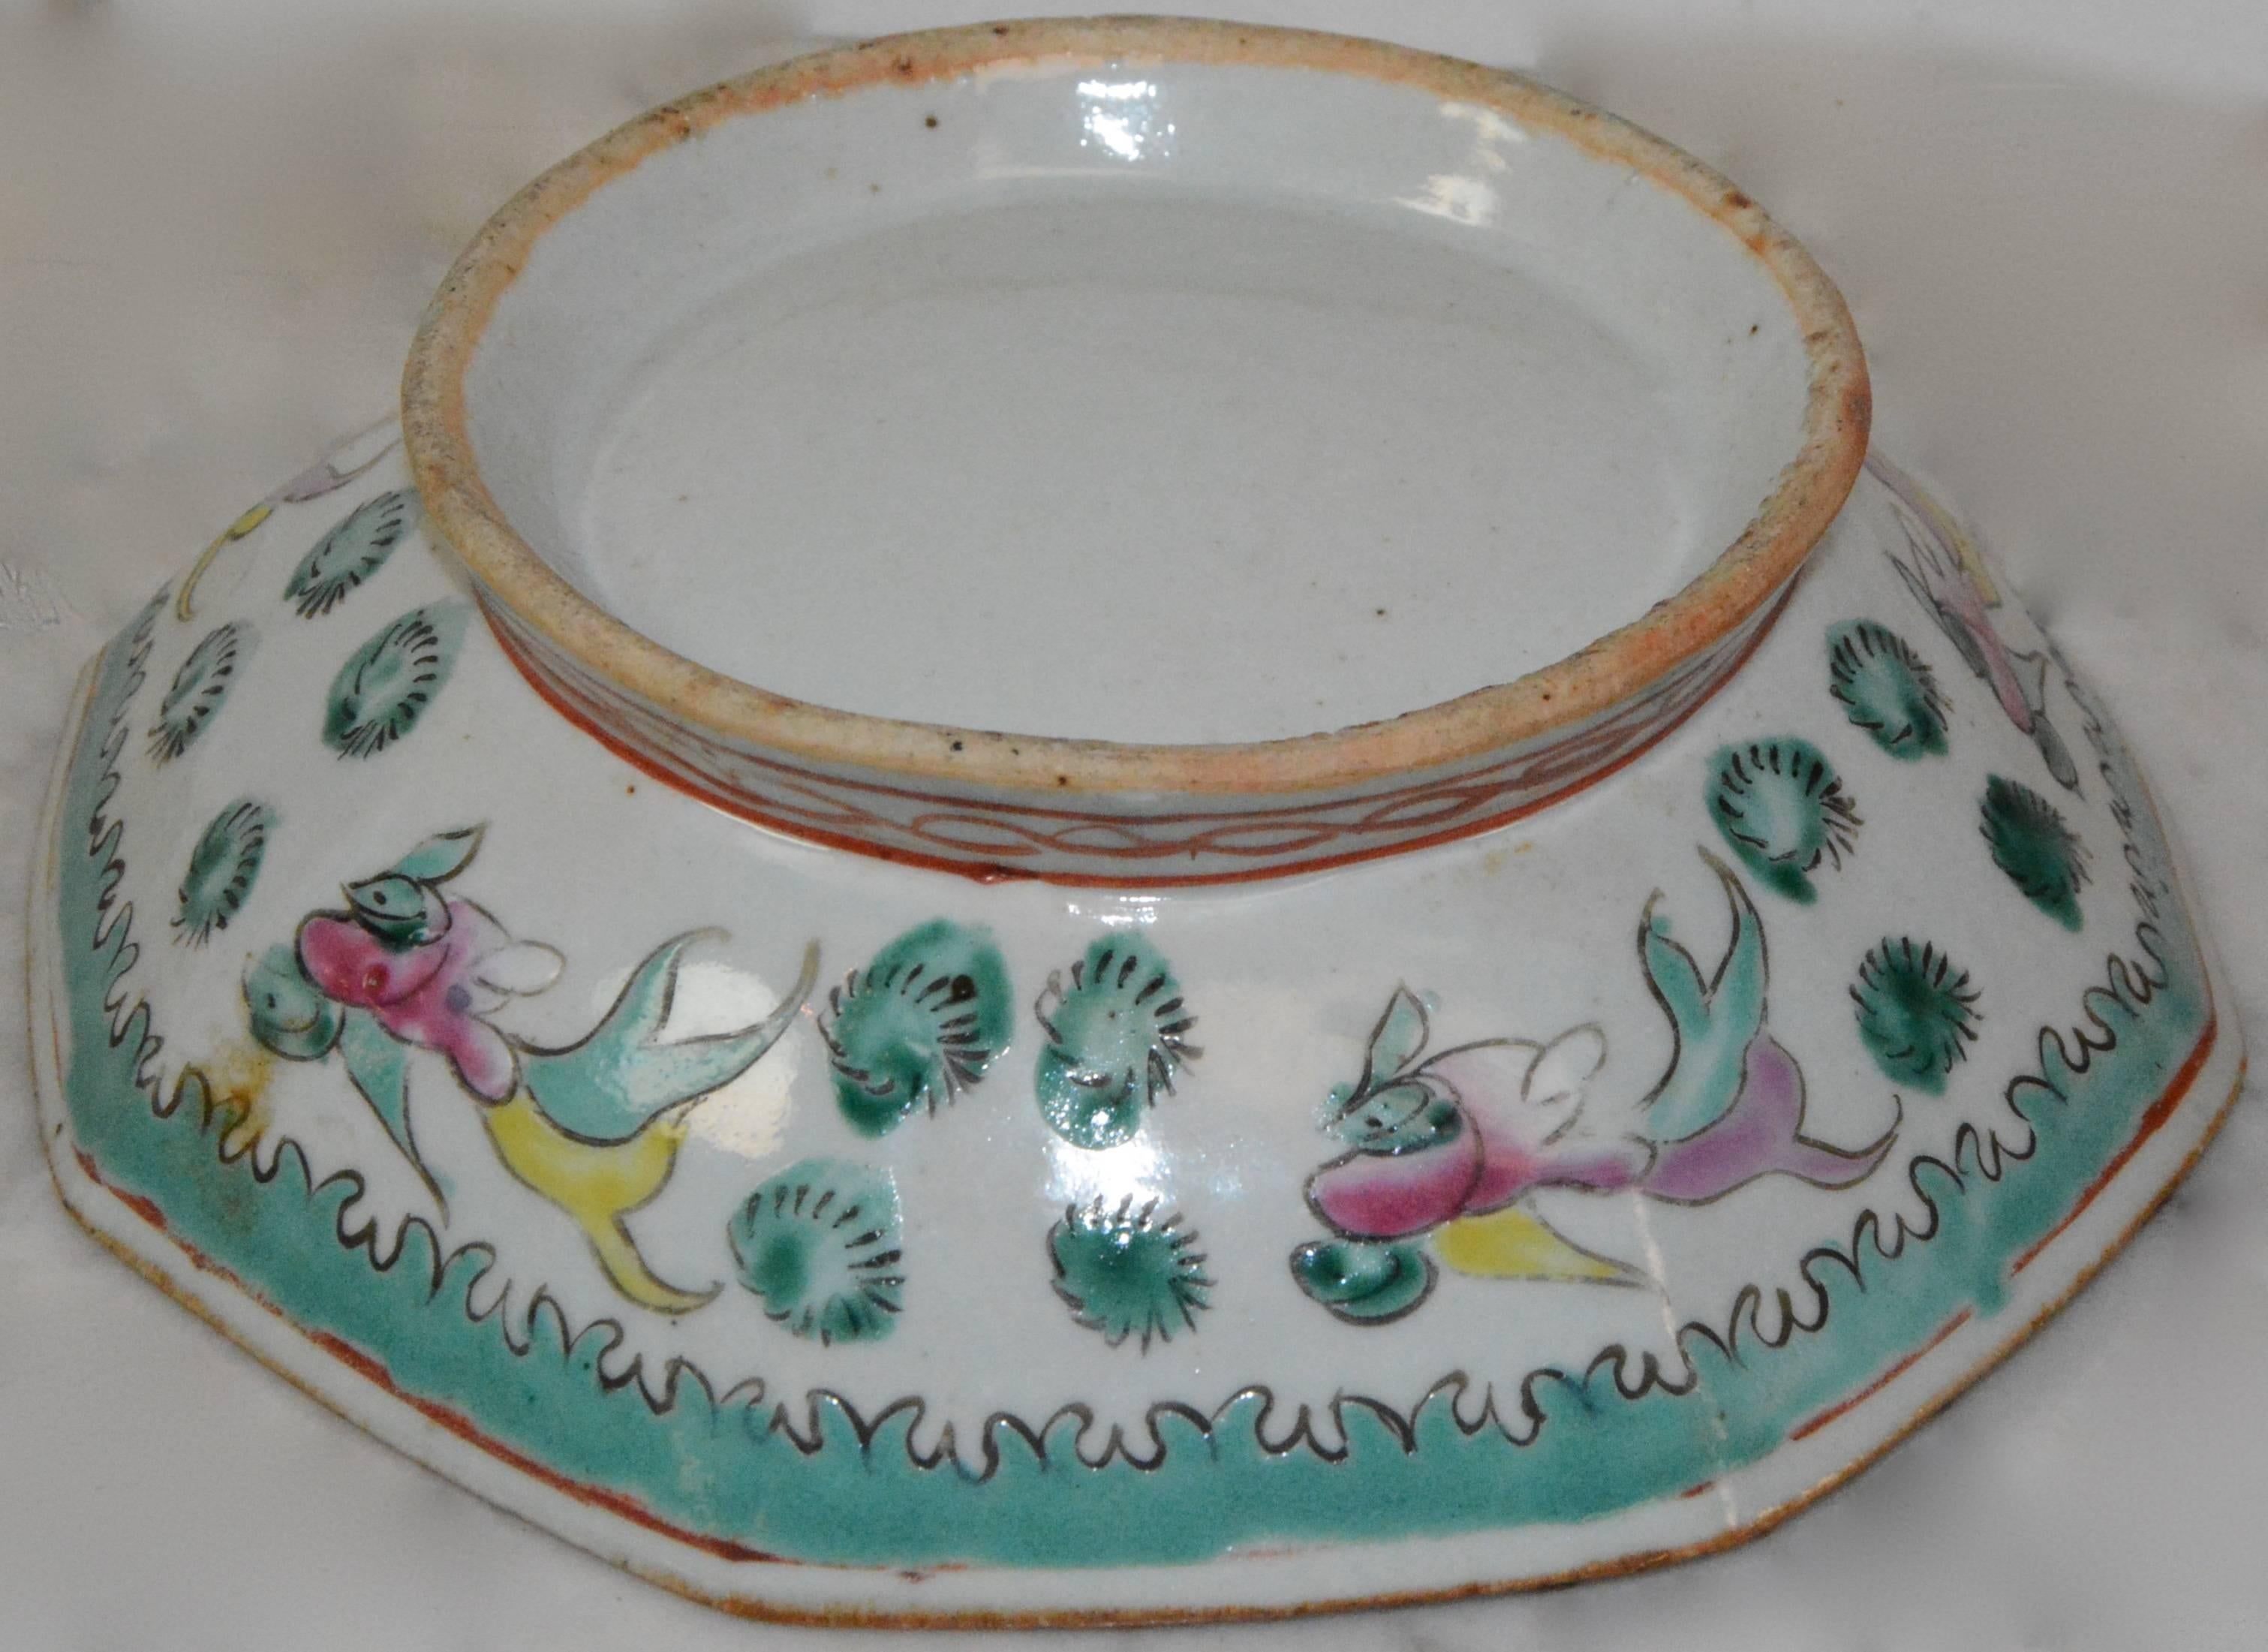 Fired Asian Porcelain Octagonal Bowl, circa Early 19th Century